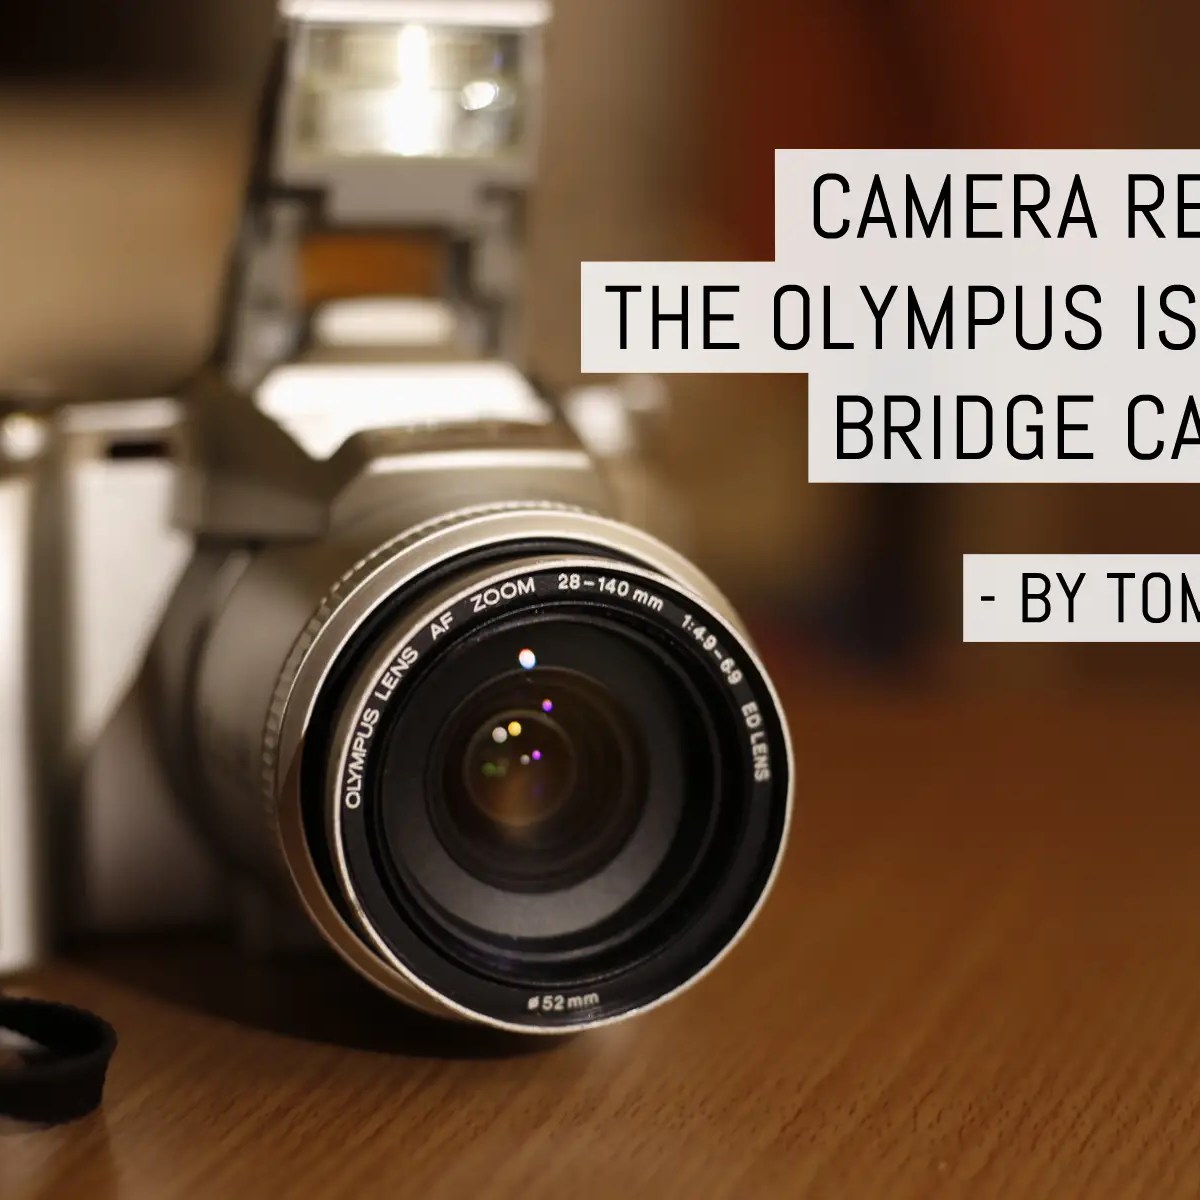 Cover - Camera review- the Olympus IS-5000 bridge camera - by Tom Perry